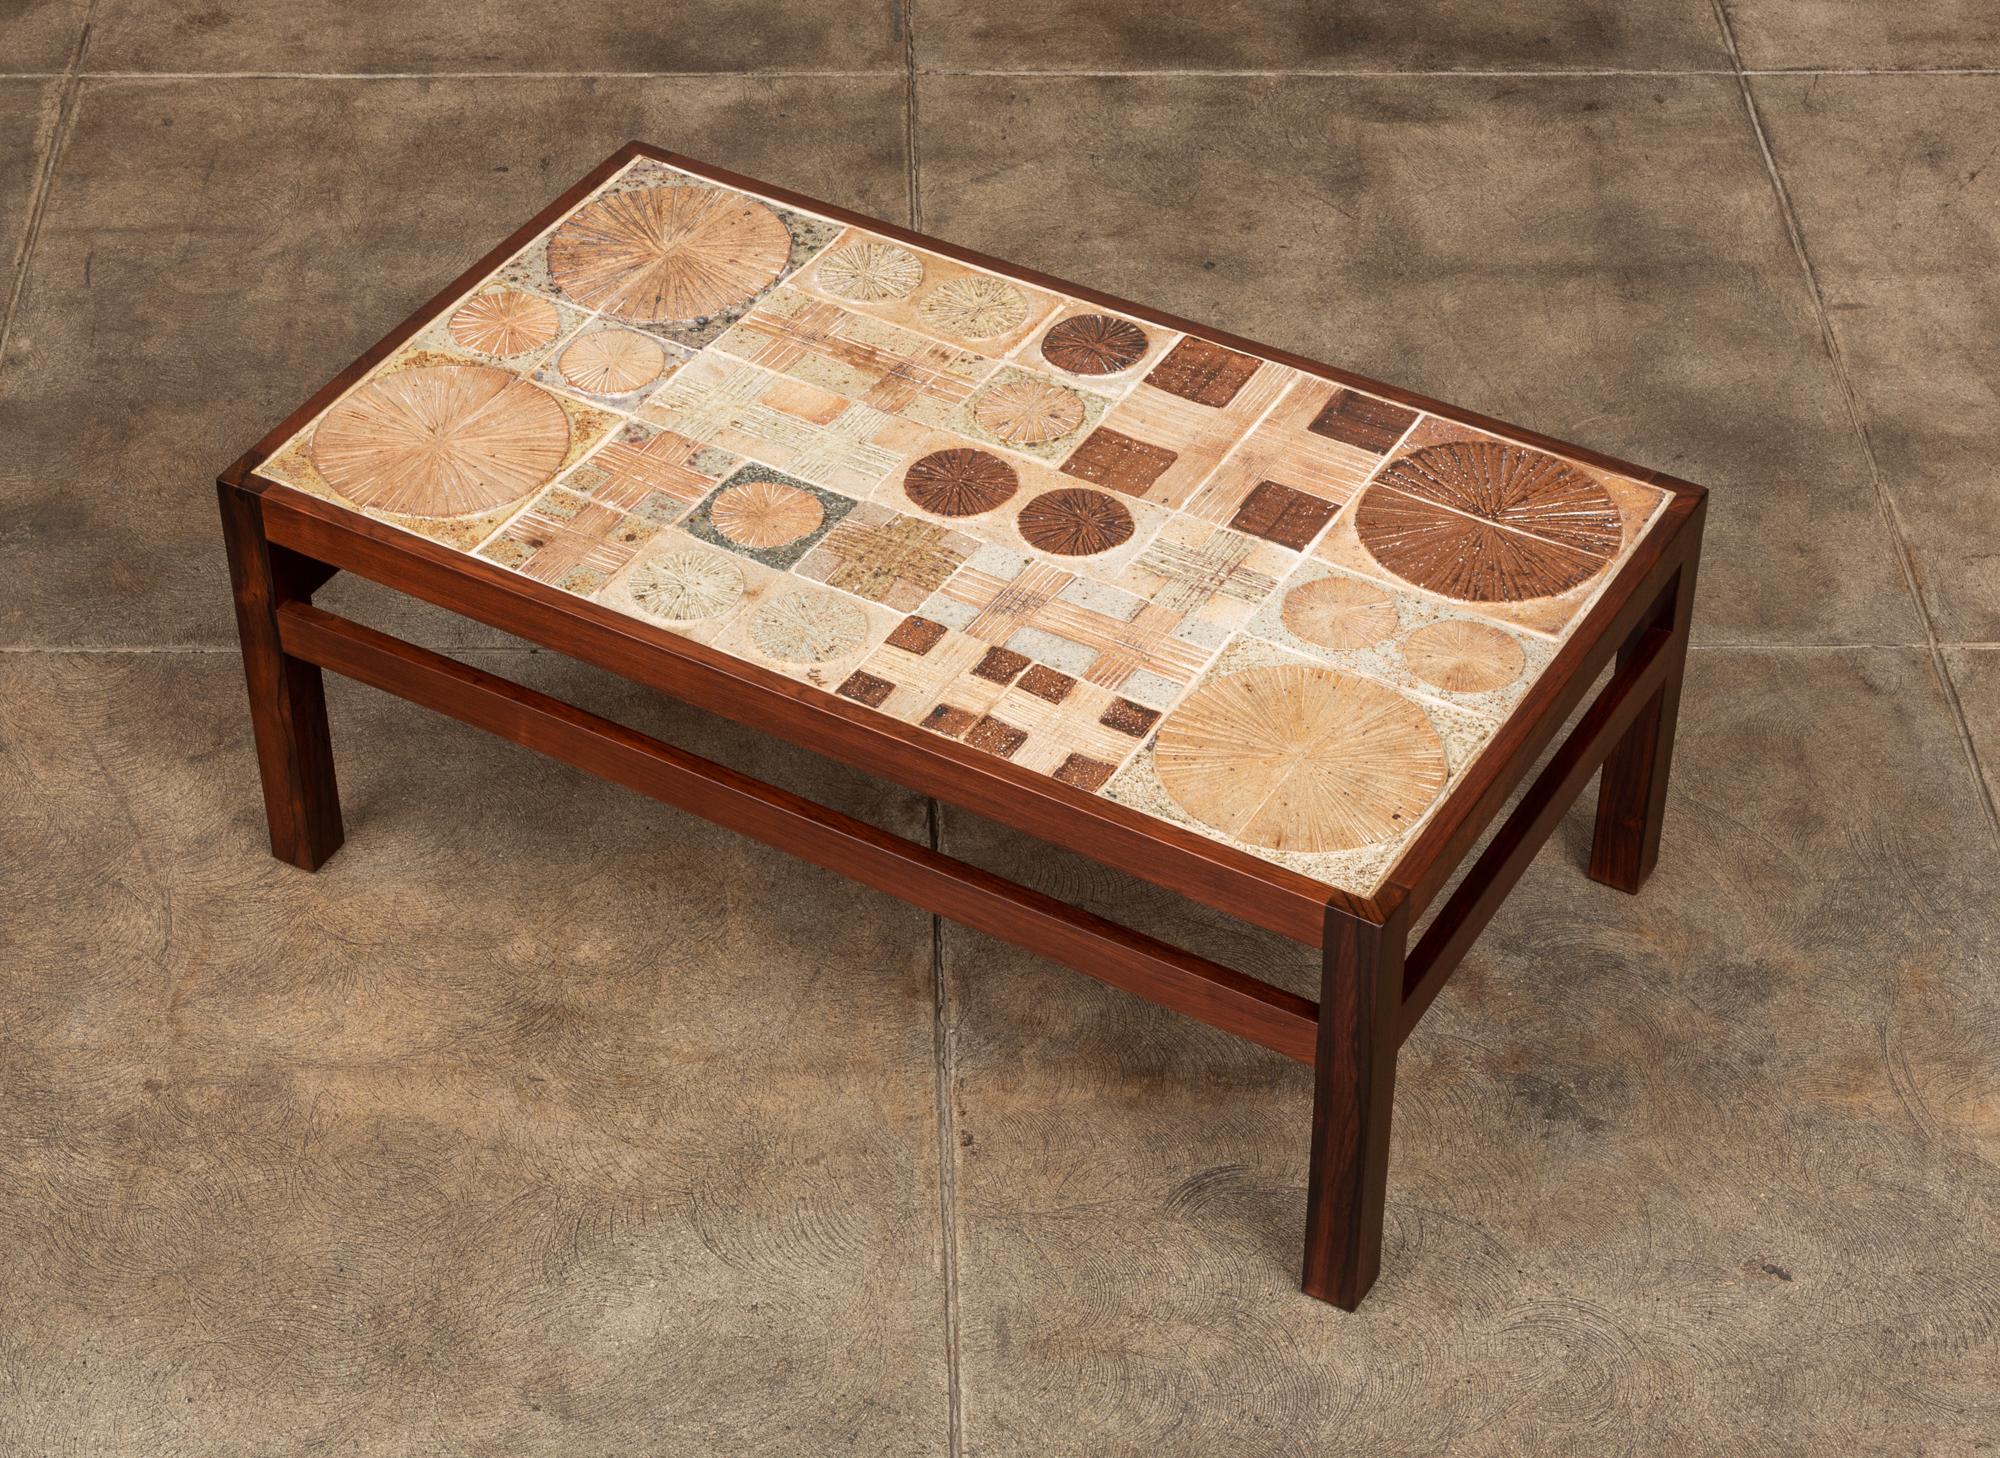 Mid-20th Century Rosewood and Mosaic Tile Coffee Table by Tue Poulsen